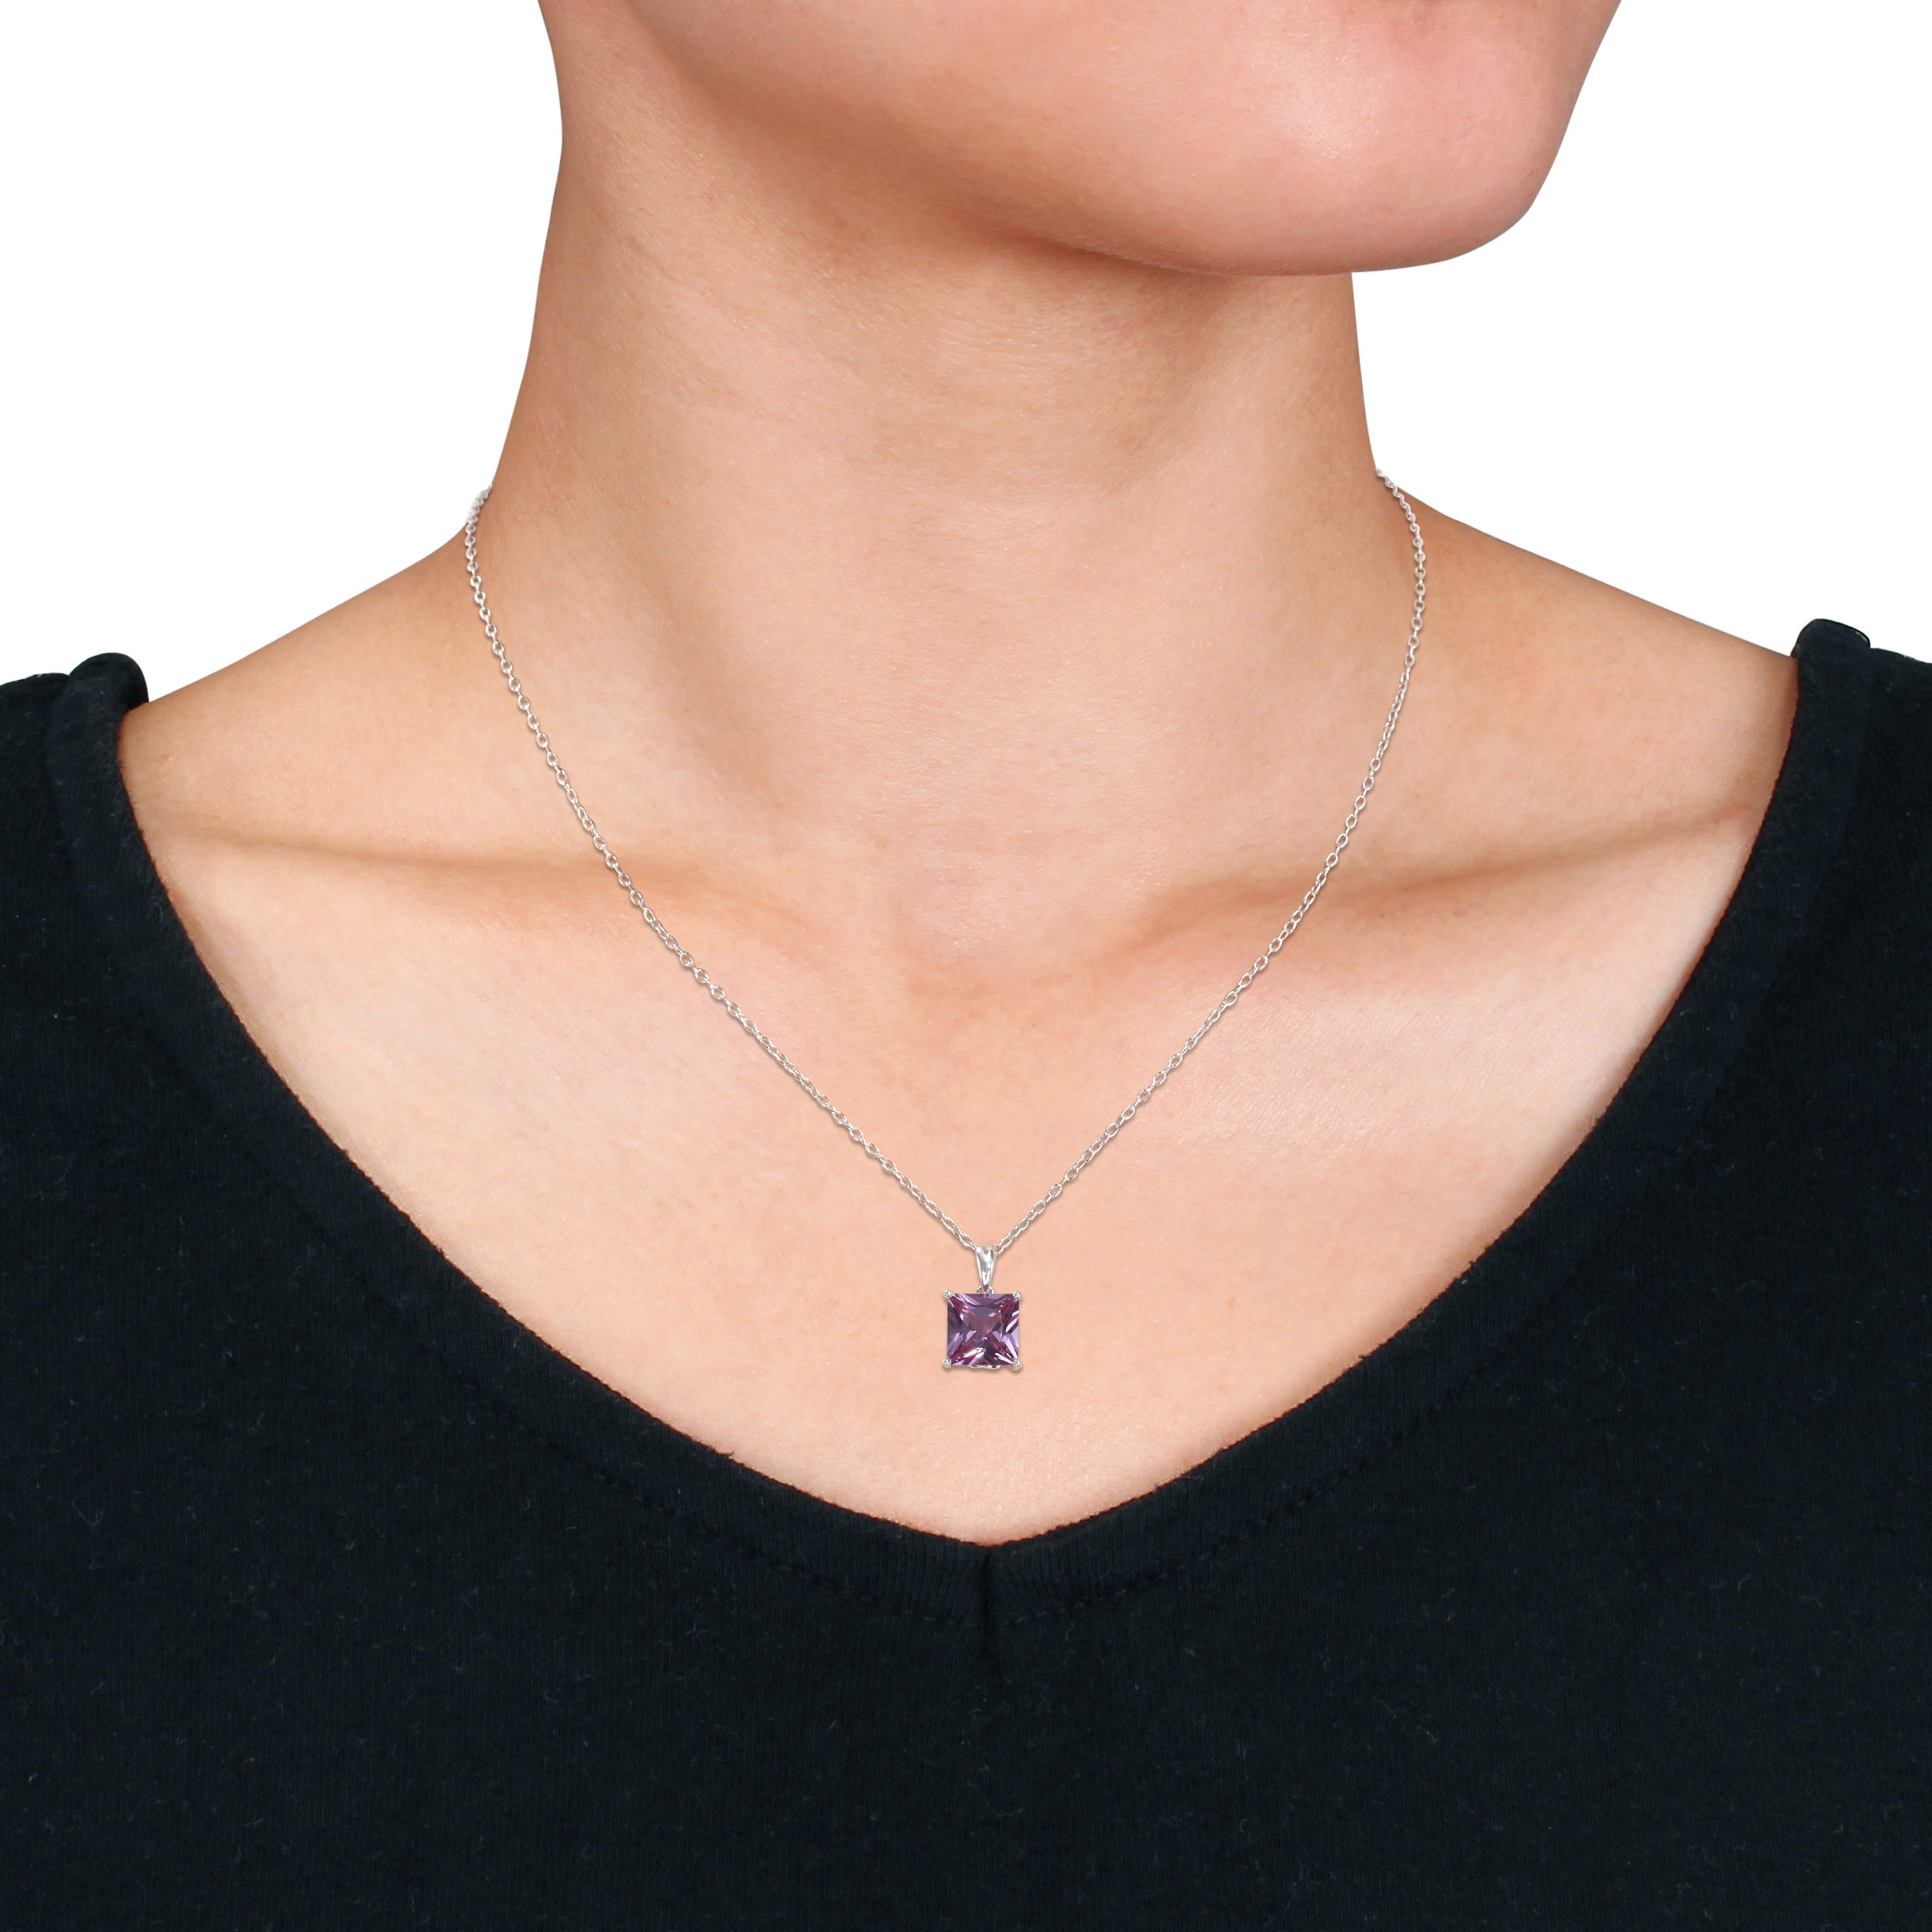 2 5/8 CT TGW Princess Cut Simulated Alexandrite Solitaire Heart Design Pendant with Chain in Sterling Silver - 18 in.